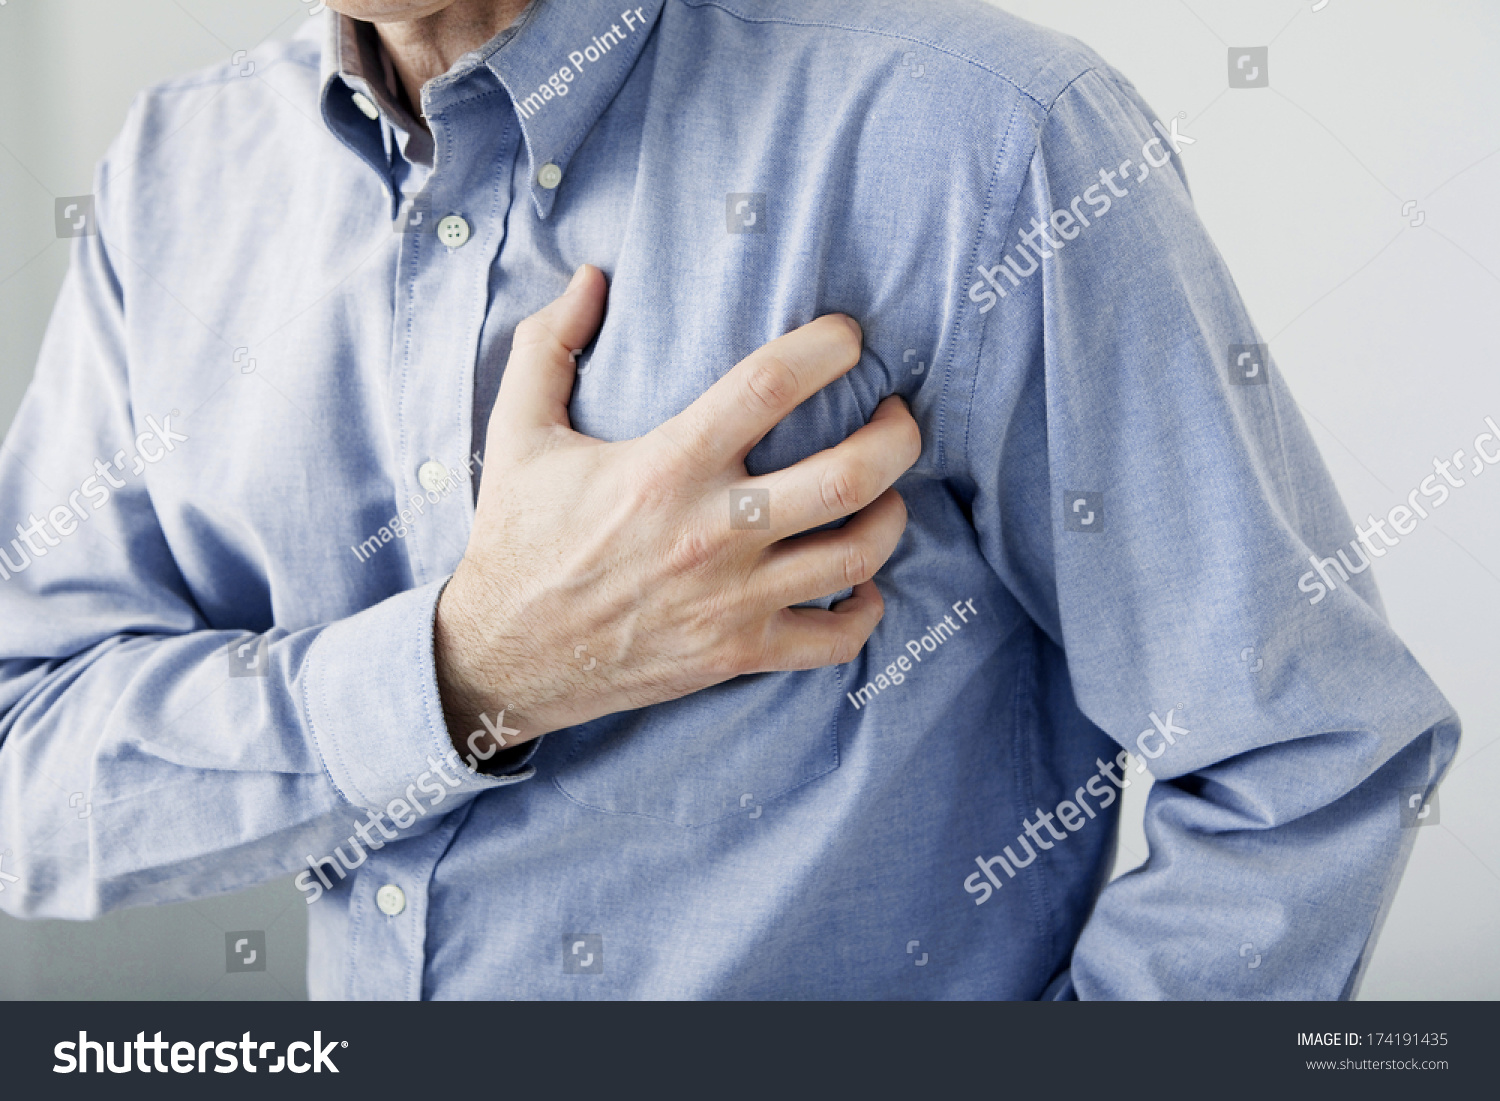 Man With Heart Attack #174191435